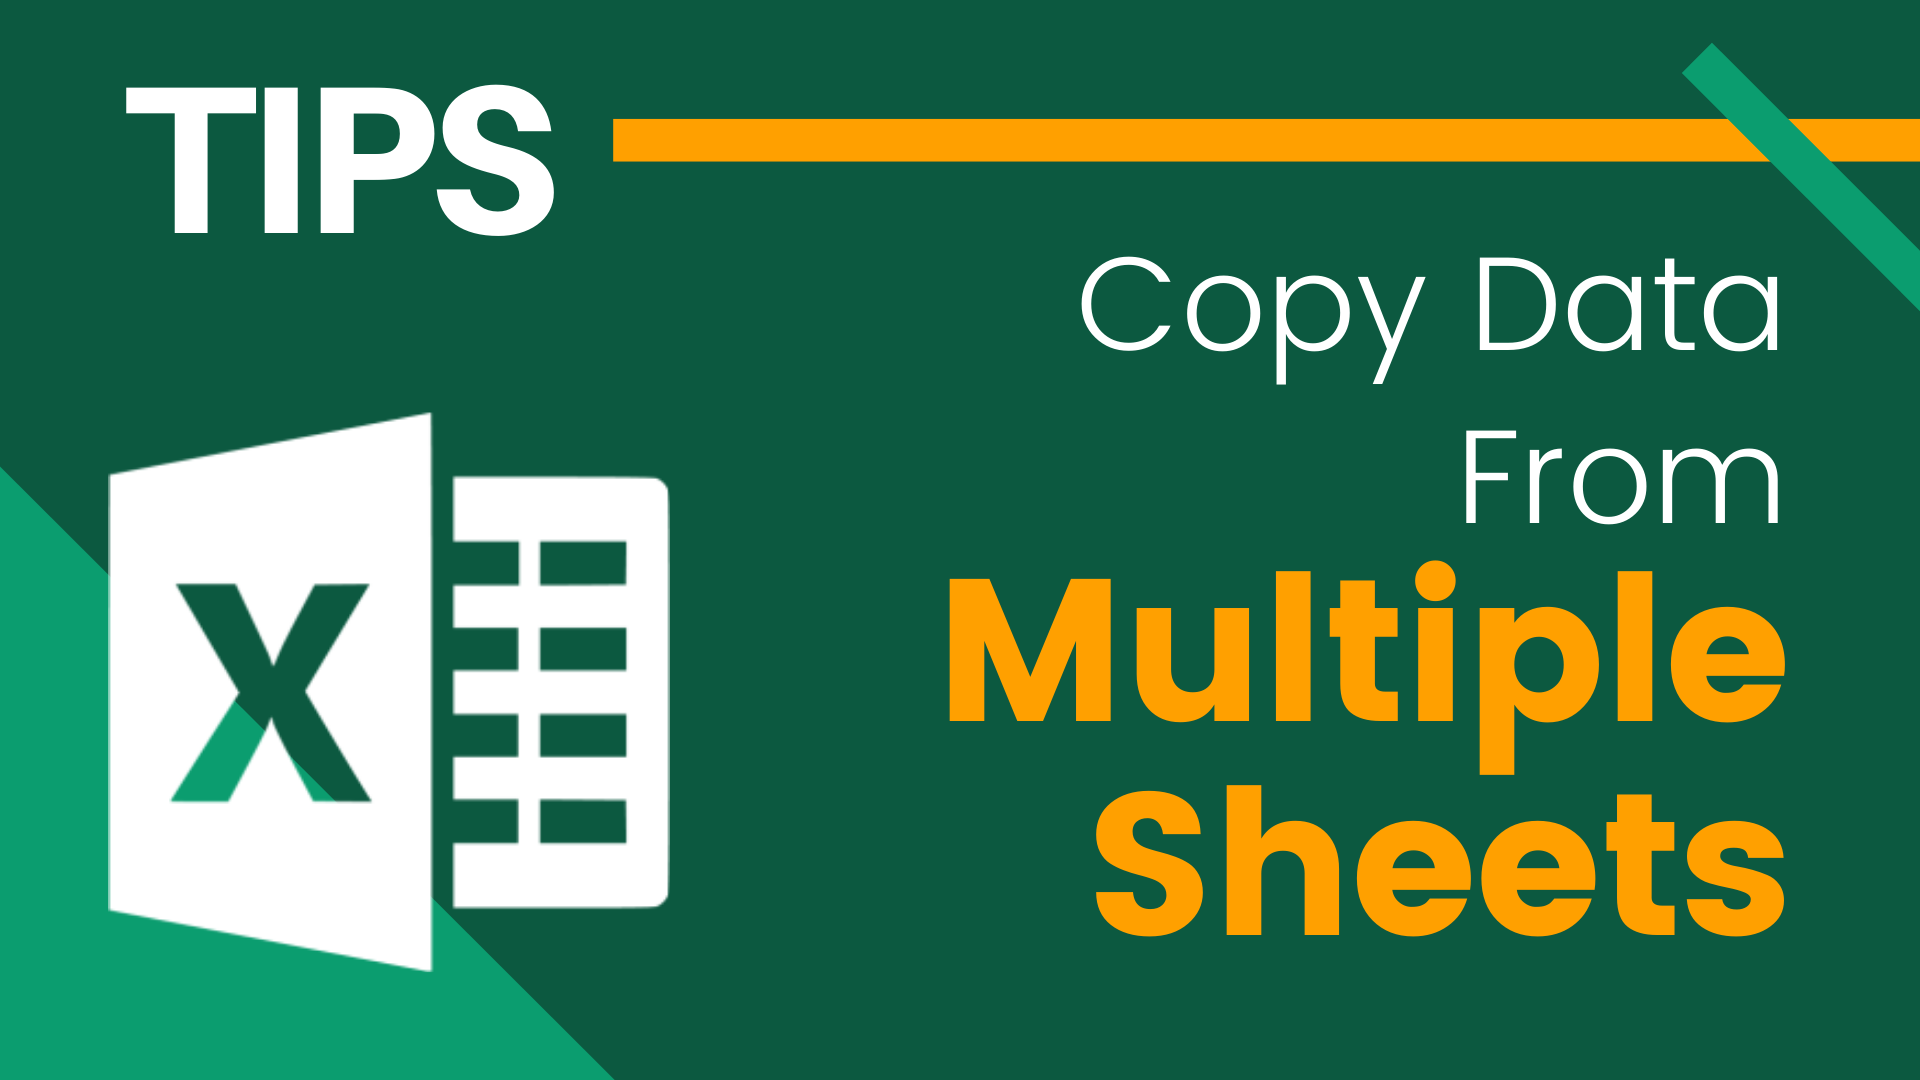 How to copy data from multiple sheets at once